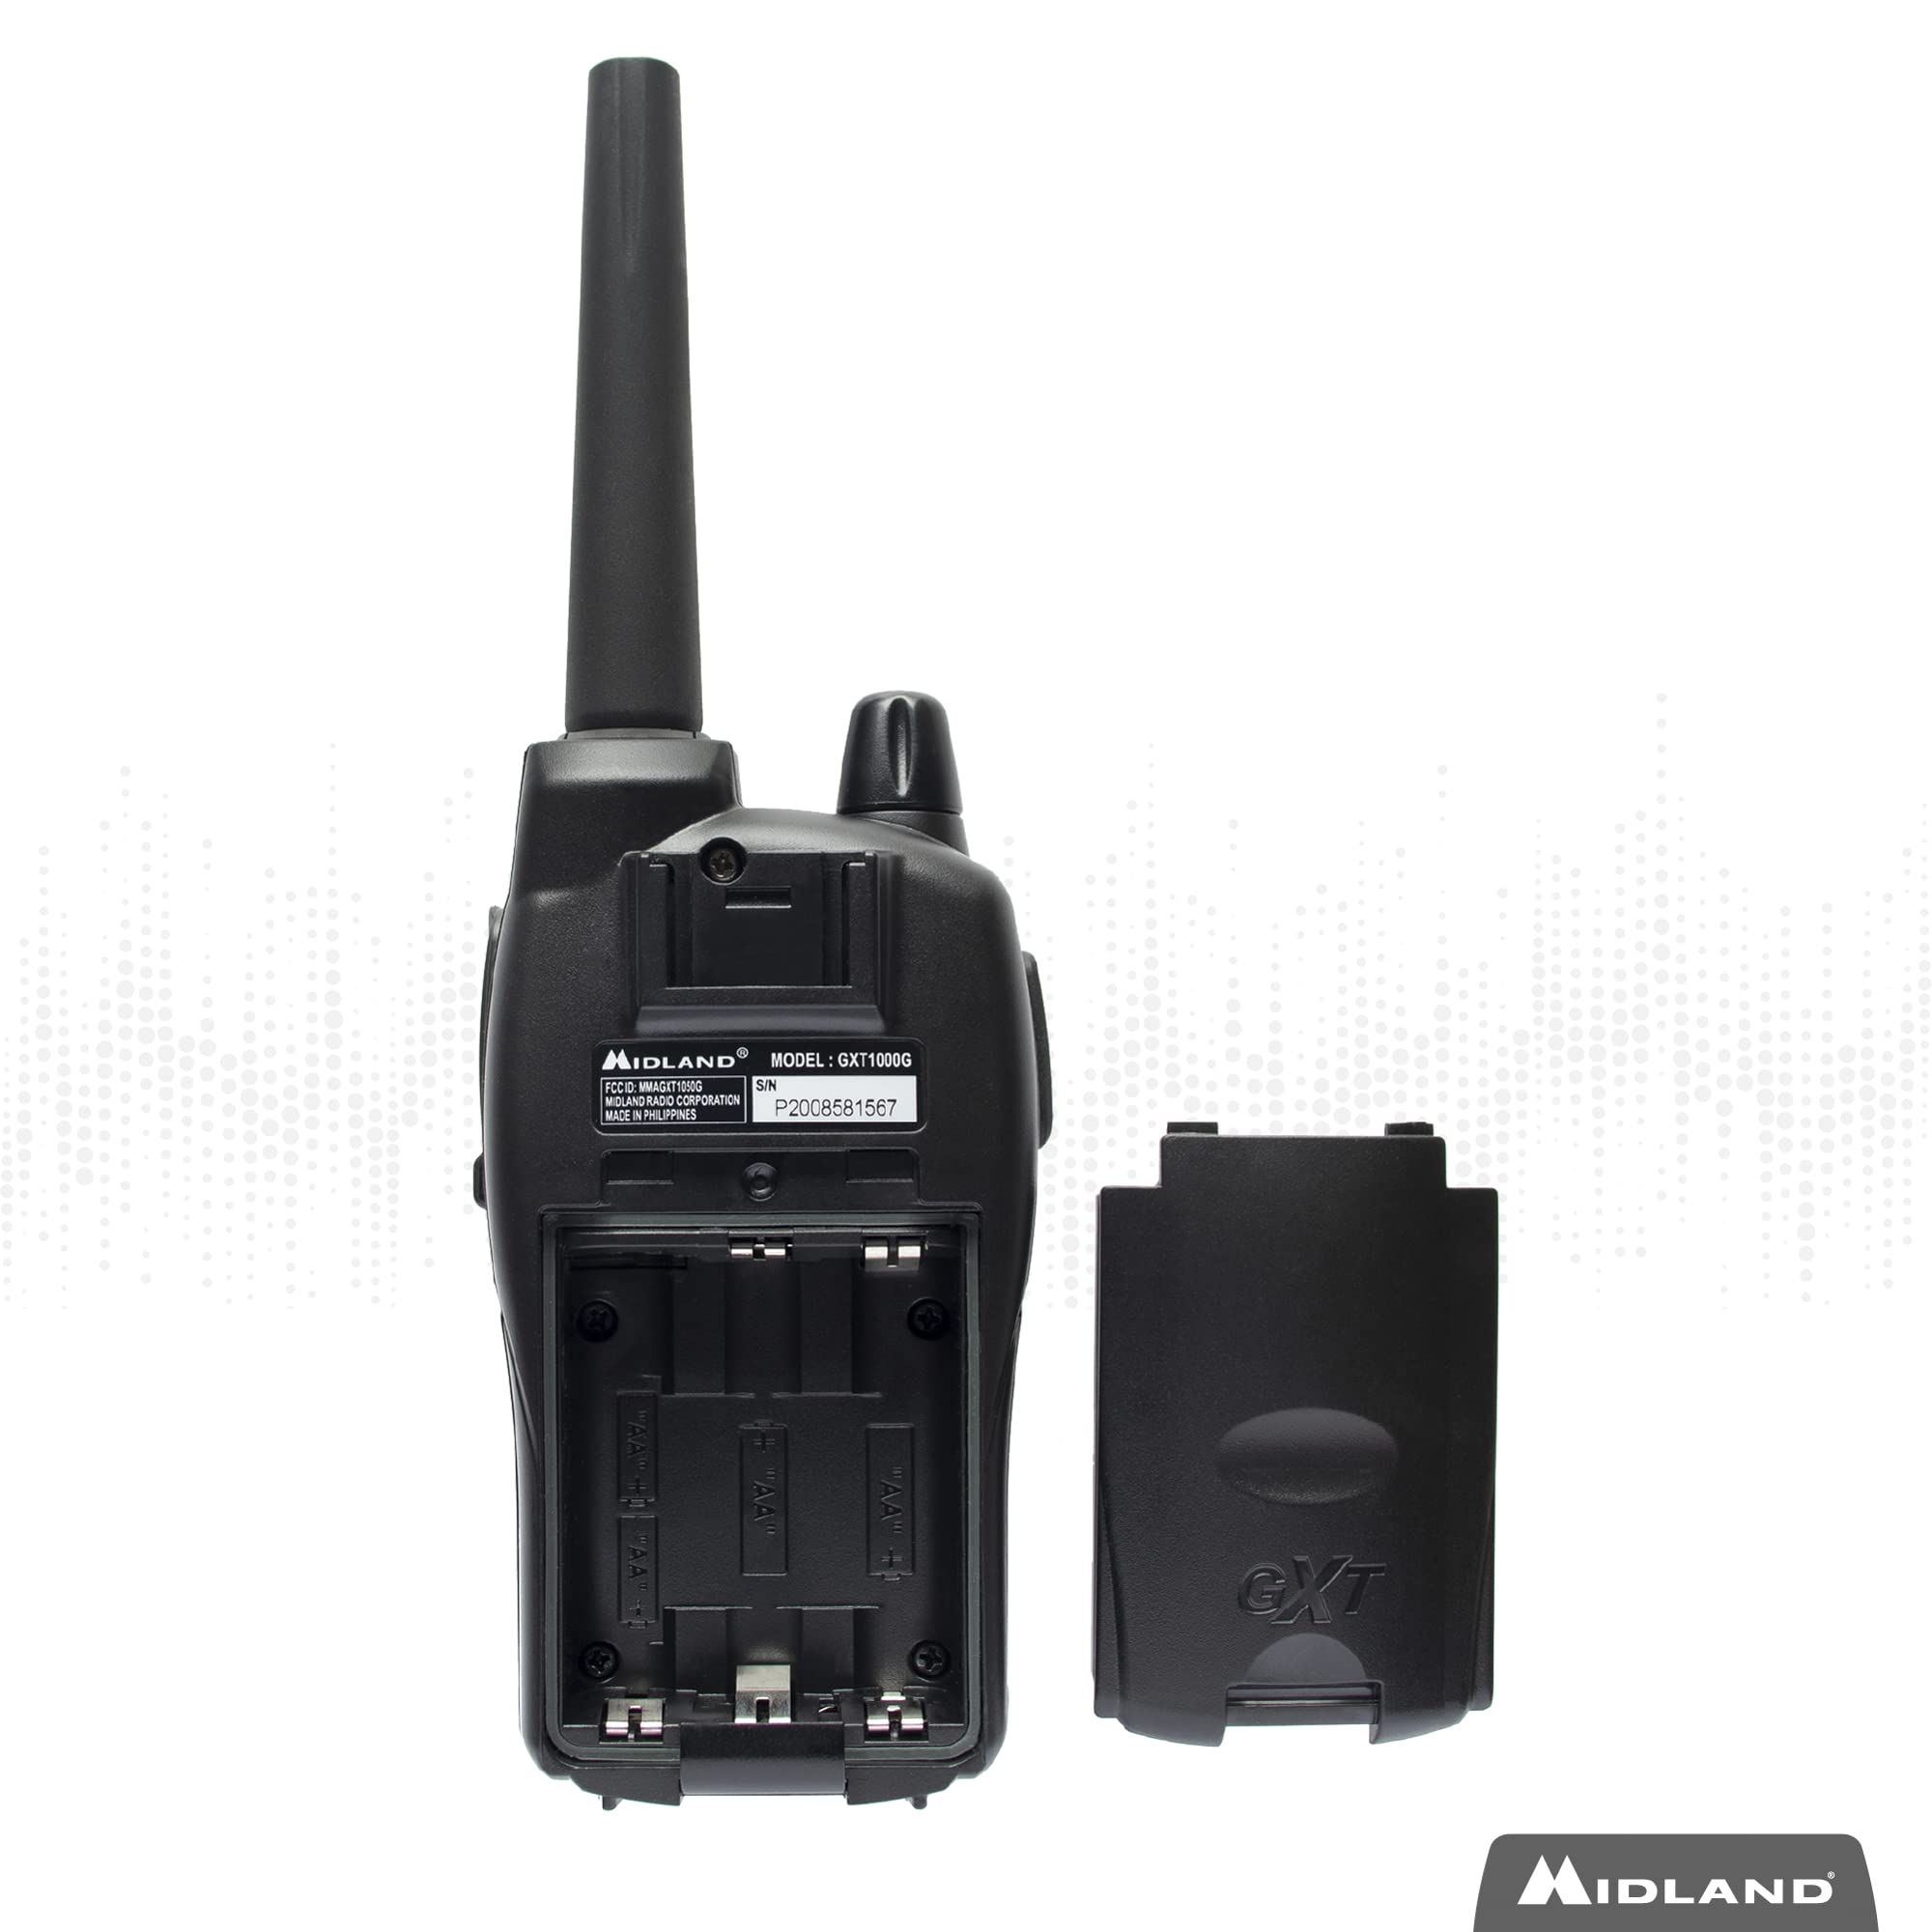 Midland 50 Channel GMRS Two-Way Radio - Long Range Walkie Talkie with 142 Privacy Codes, SOS Siren, and NOAA Weather Alerts and Weather Scan (Black/Silver, Single Pack)